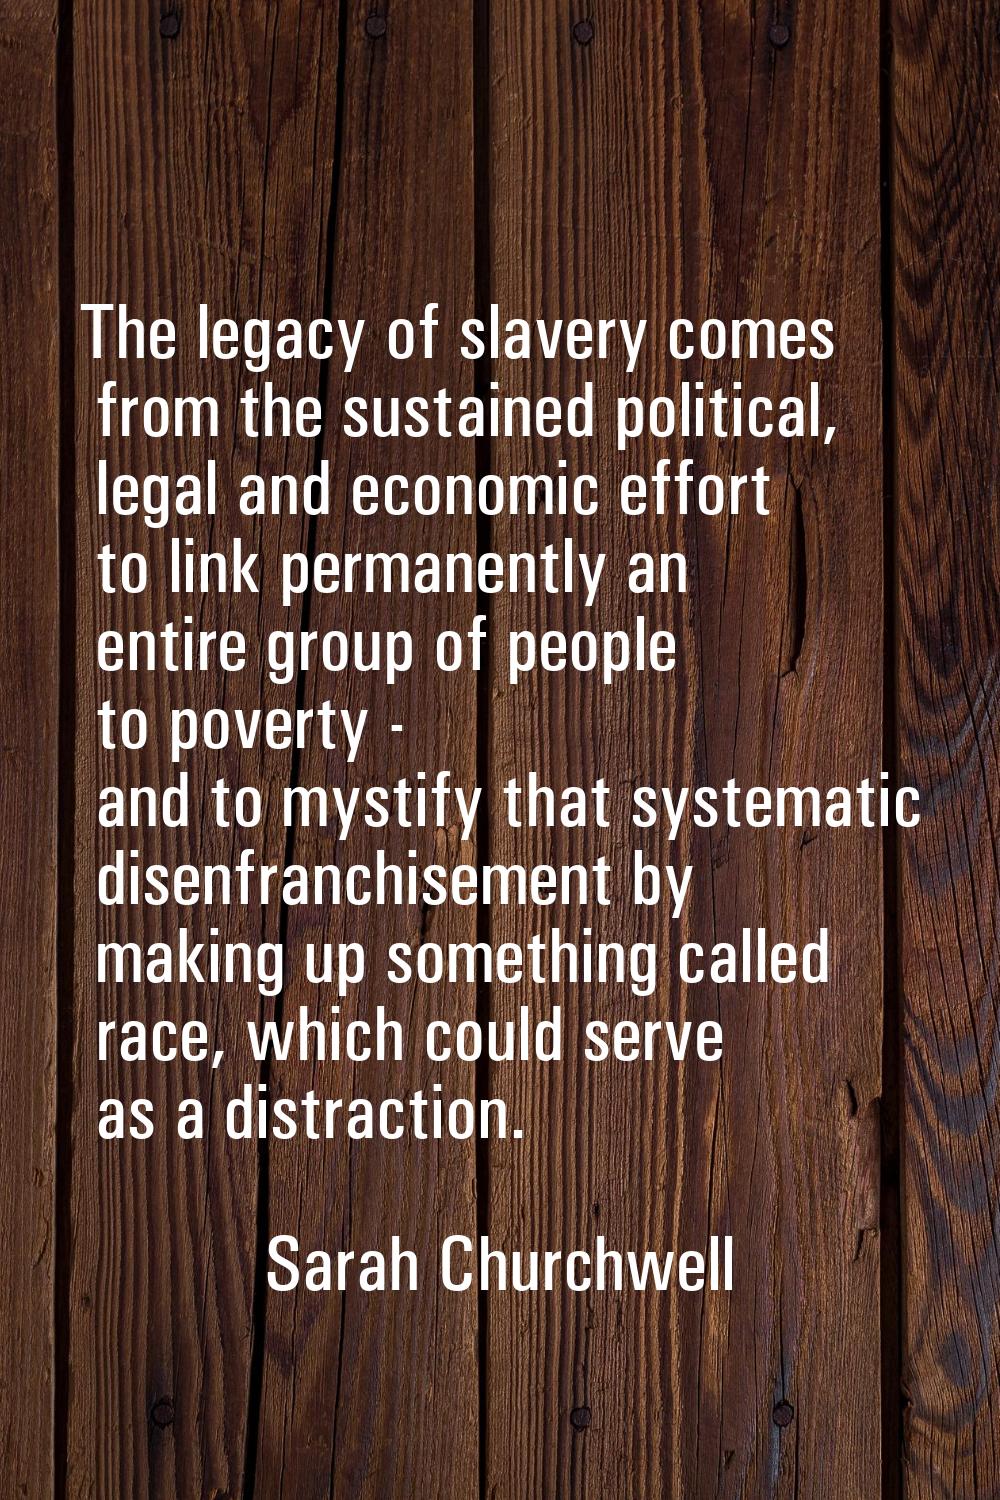 The legacy of slavery comes from the sustained political, legal and economic effort to link permane